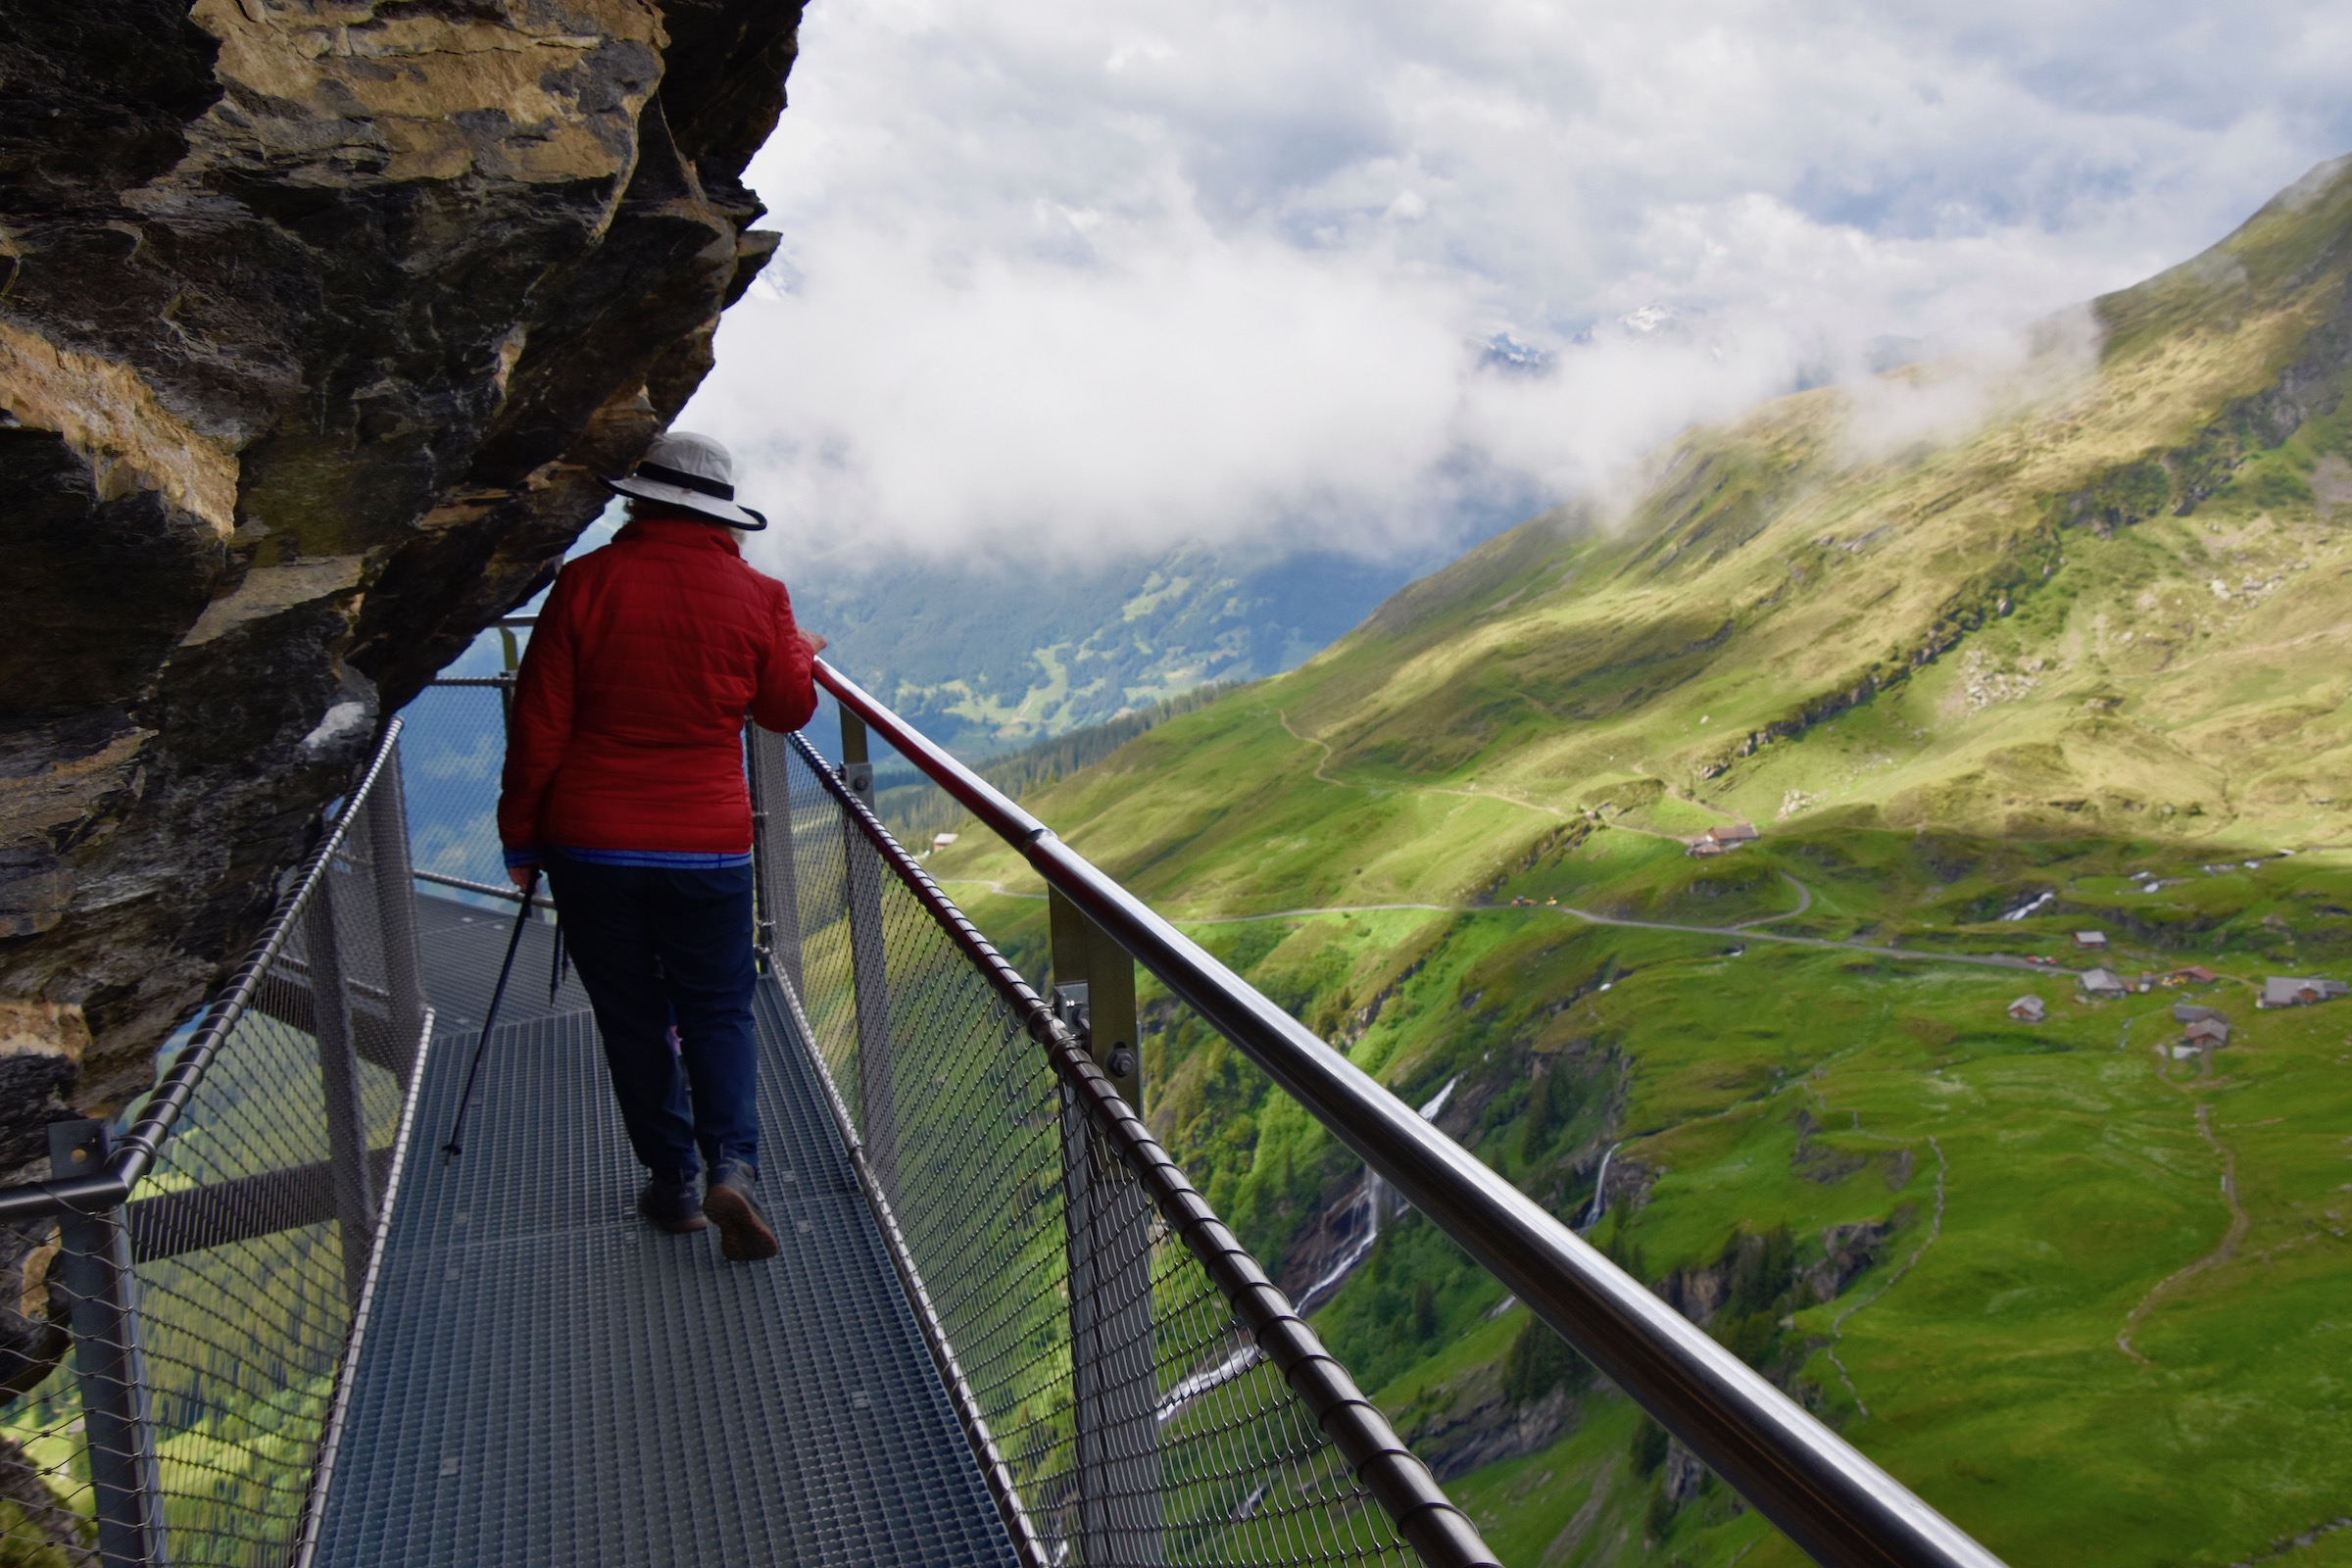 A Tight Squeeze on the Cliff Walk near Grindelwald